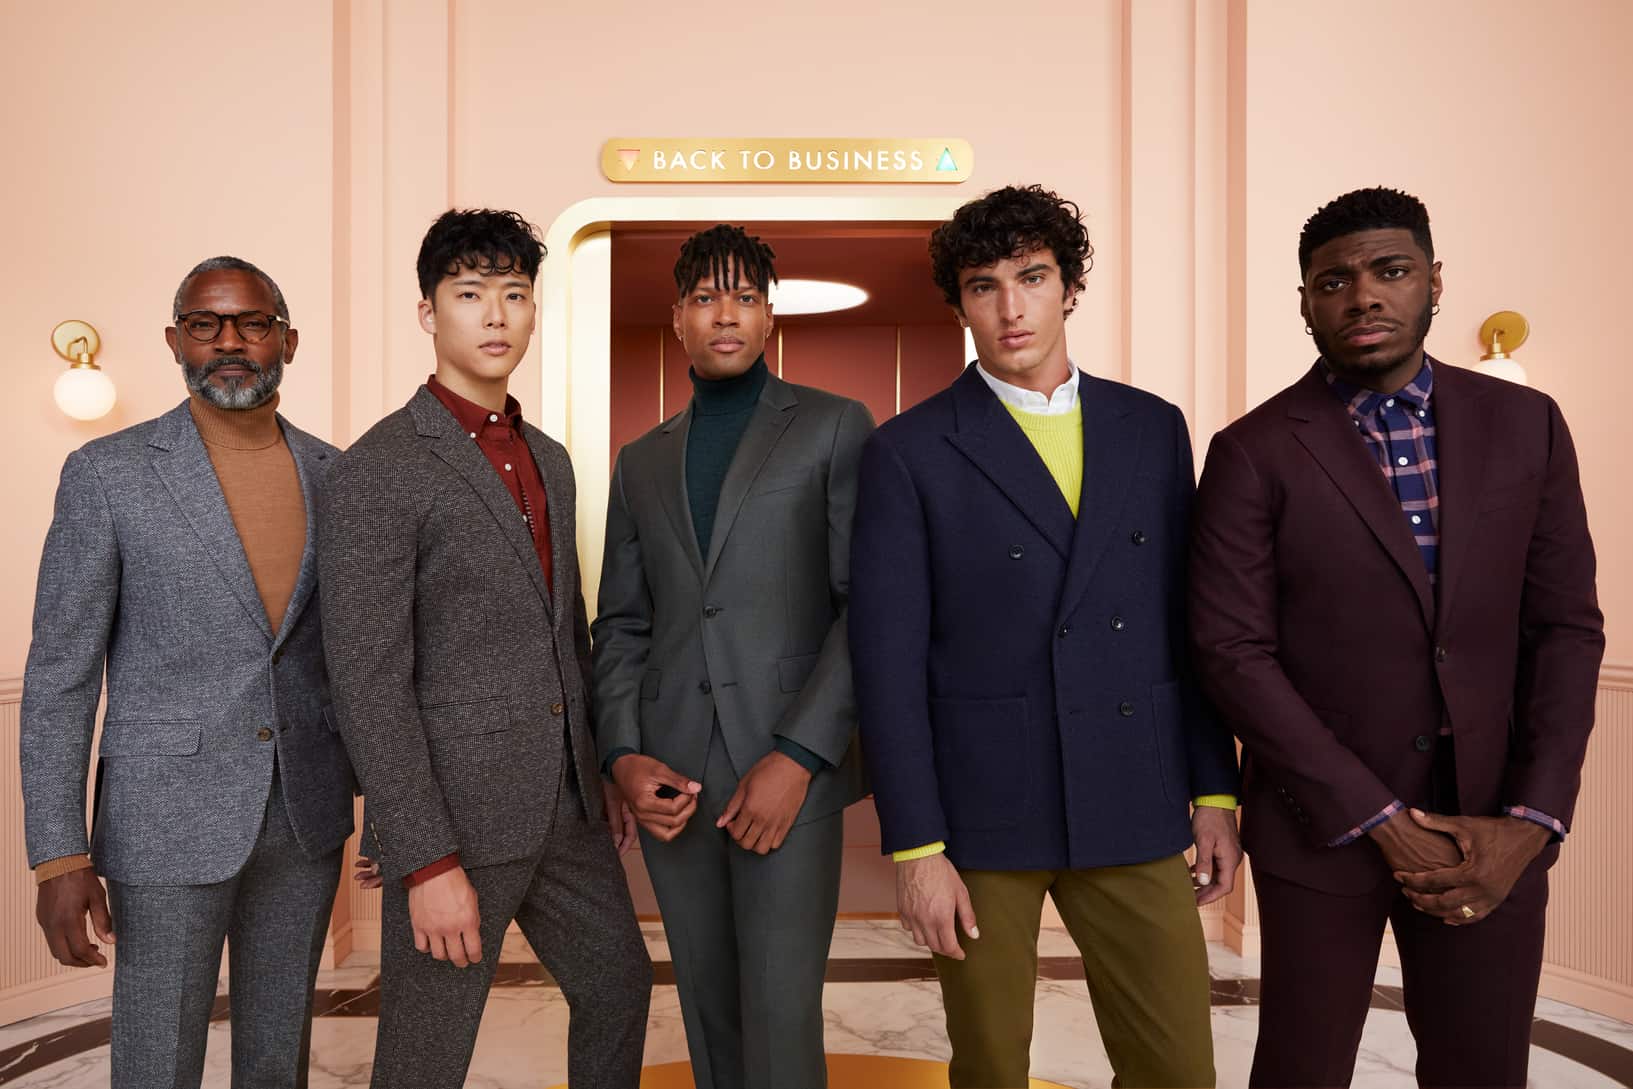 Bonobos Fall 2021 Back to business campaign